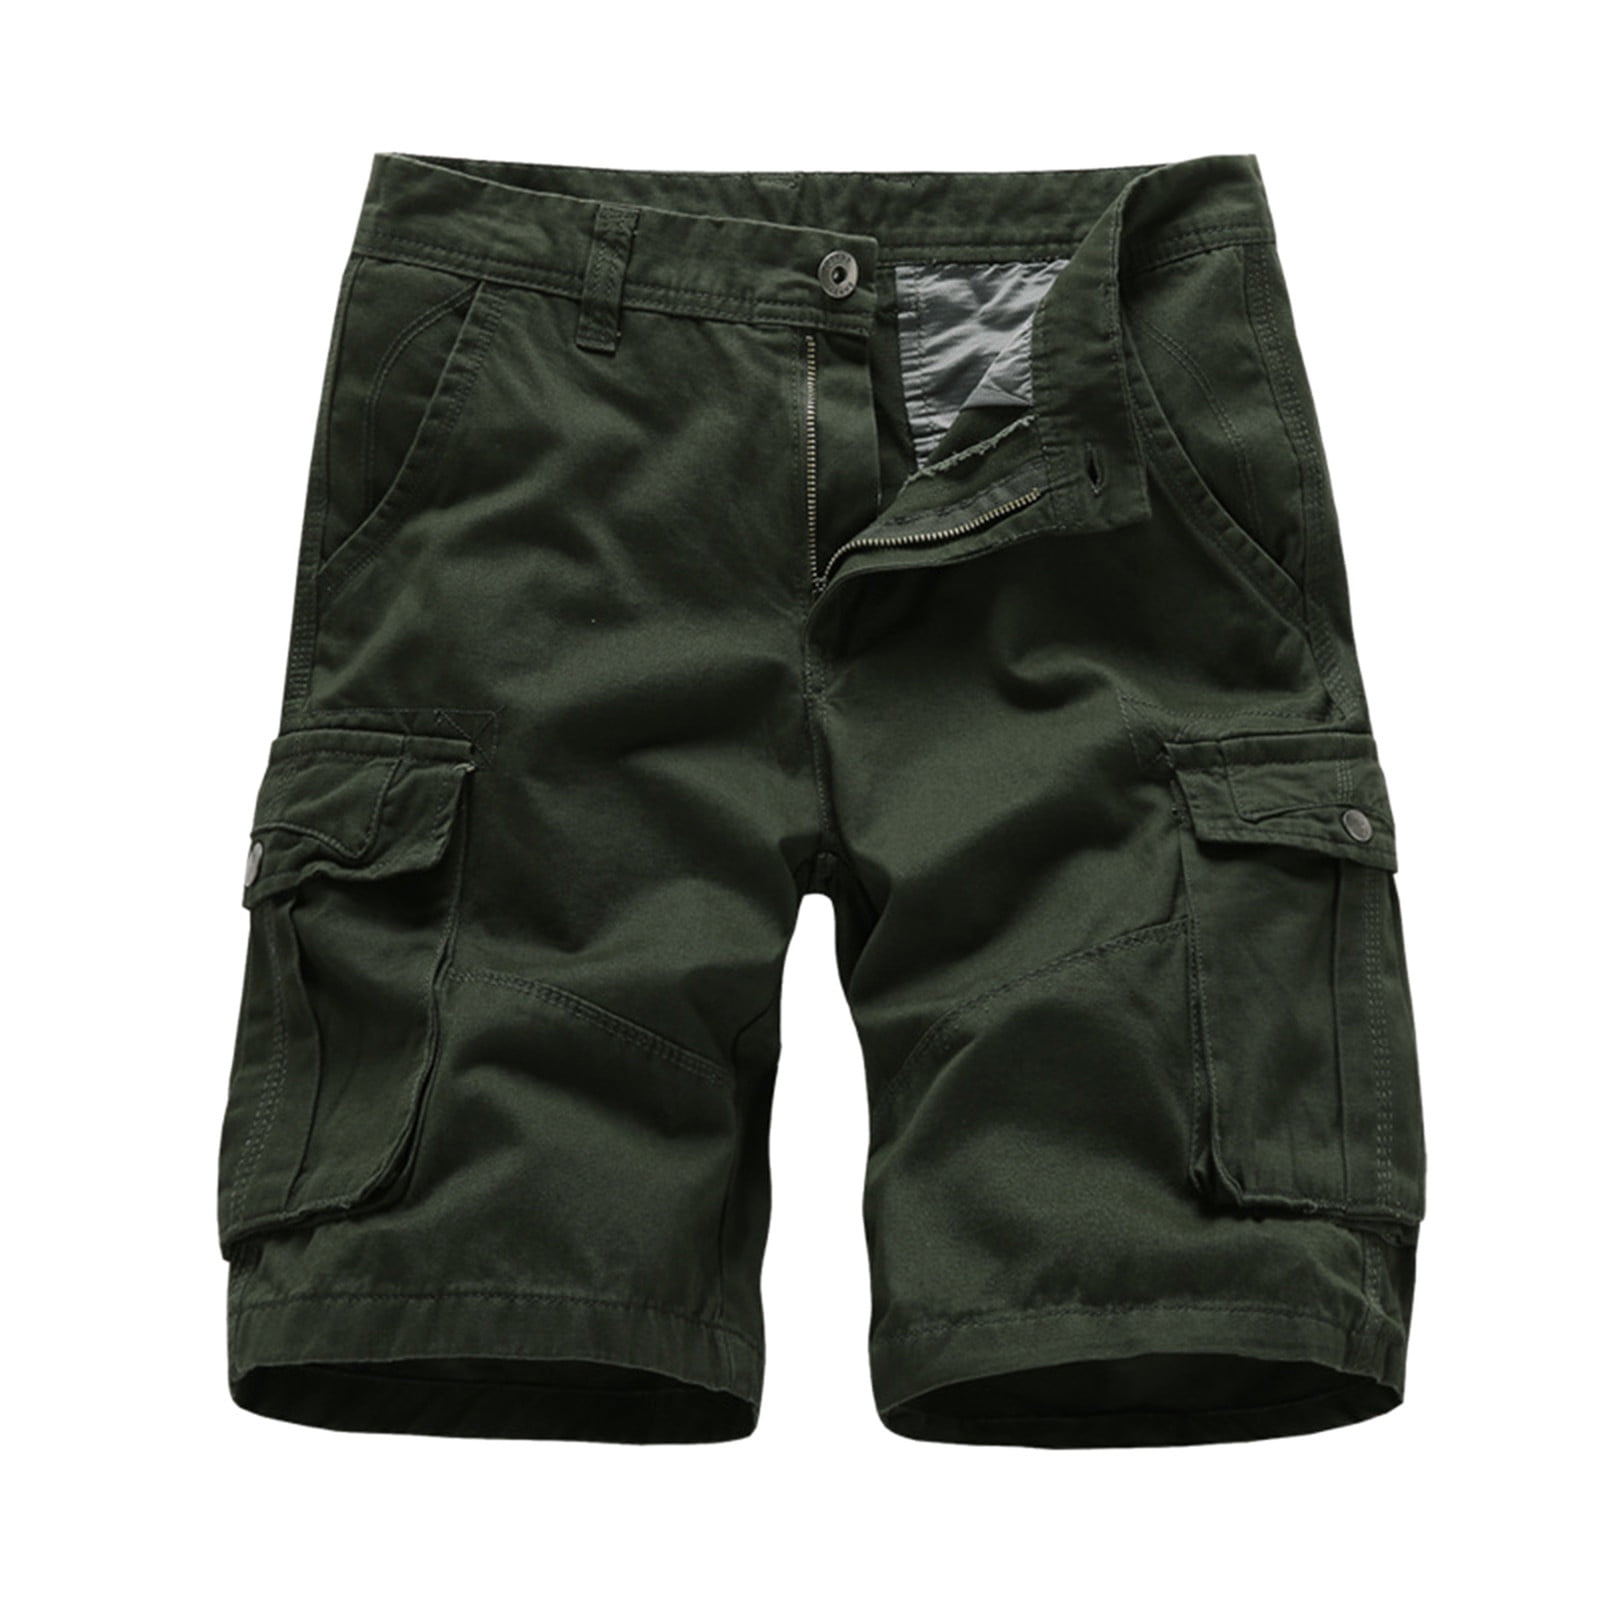 ON SALE!! Men's Casual Fashion Chino Cargo Shorts Pants Multi Pockets  Trousers 